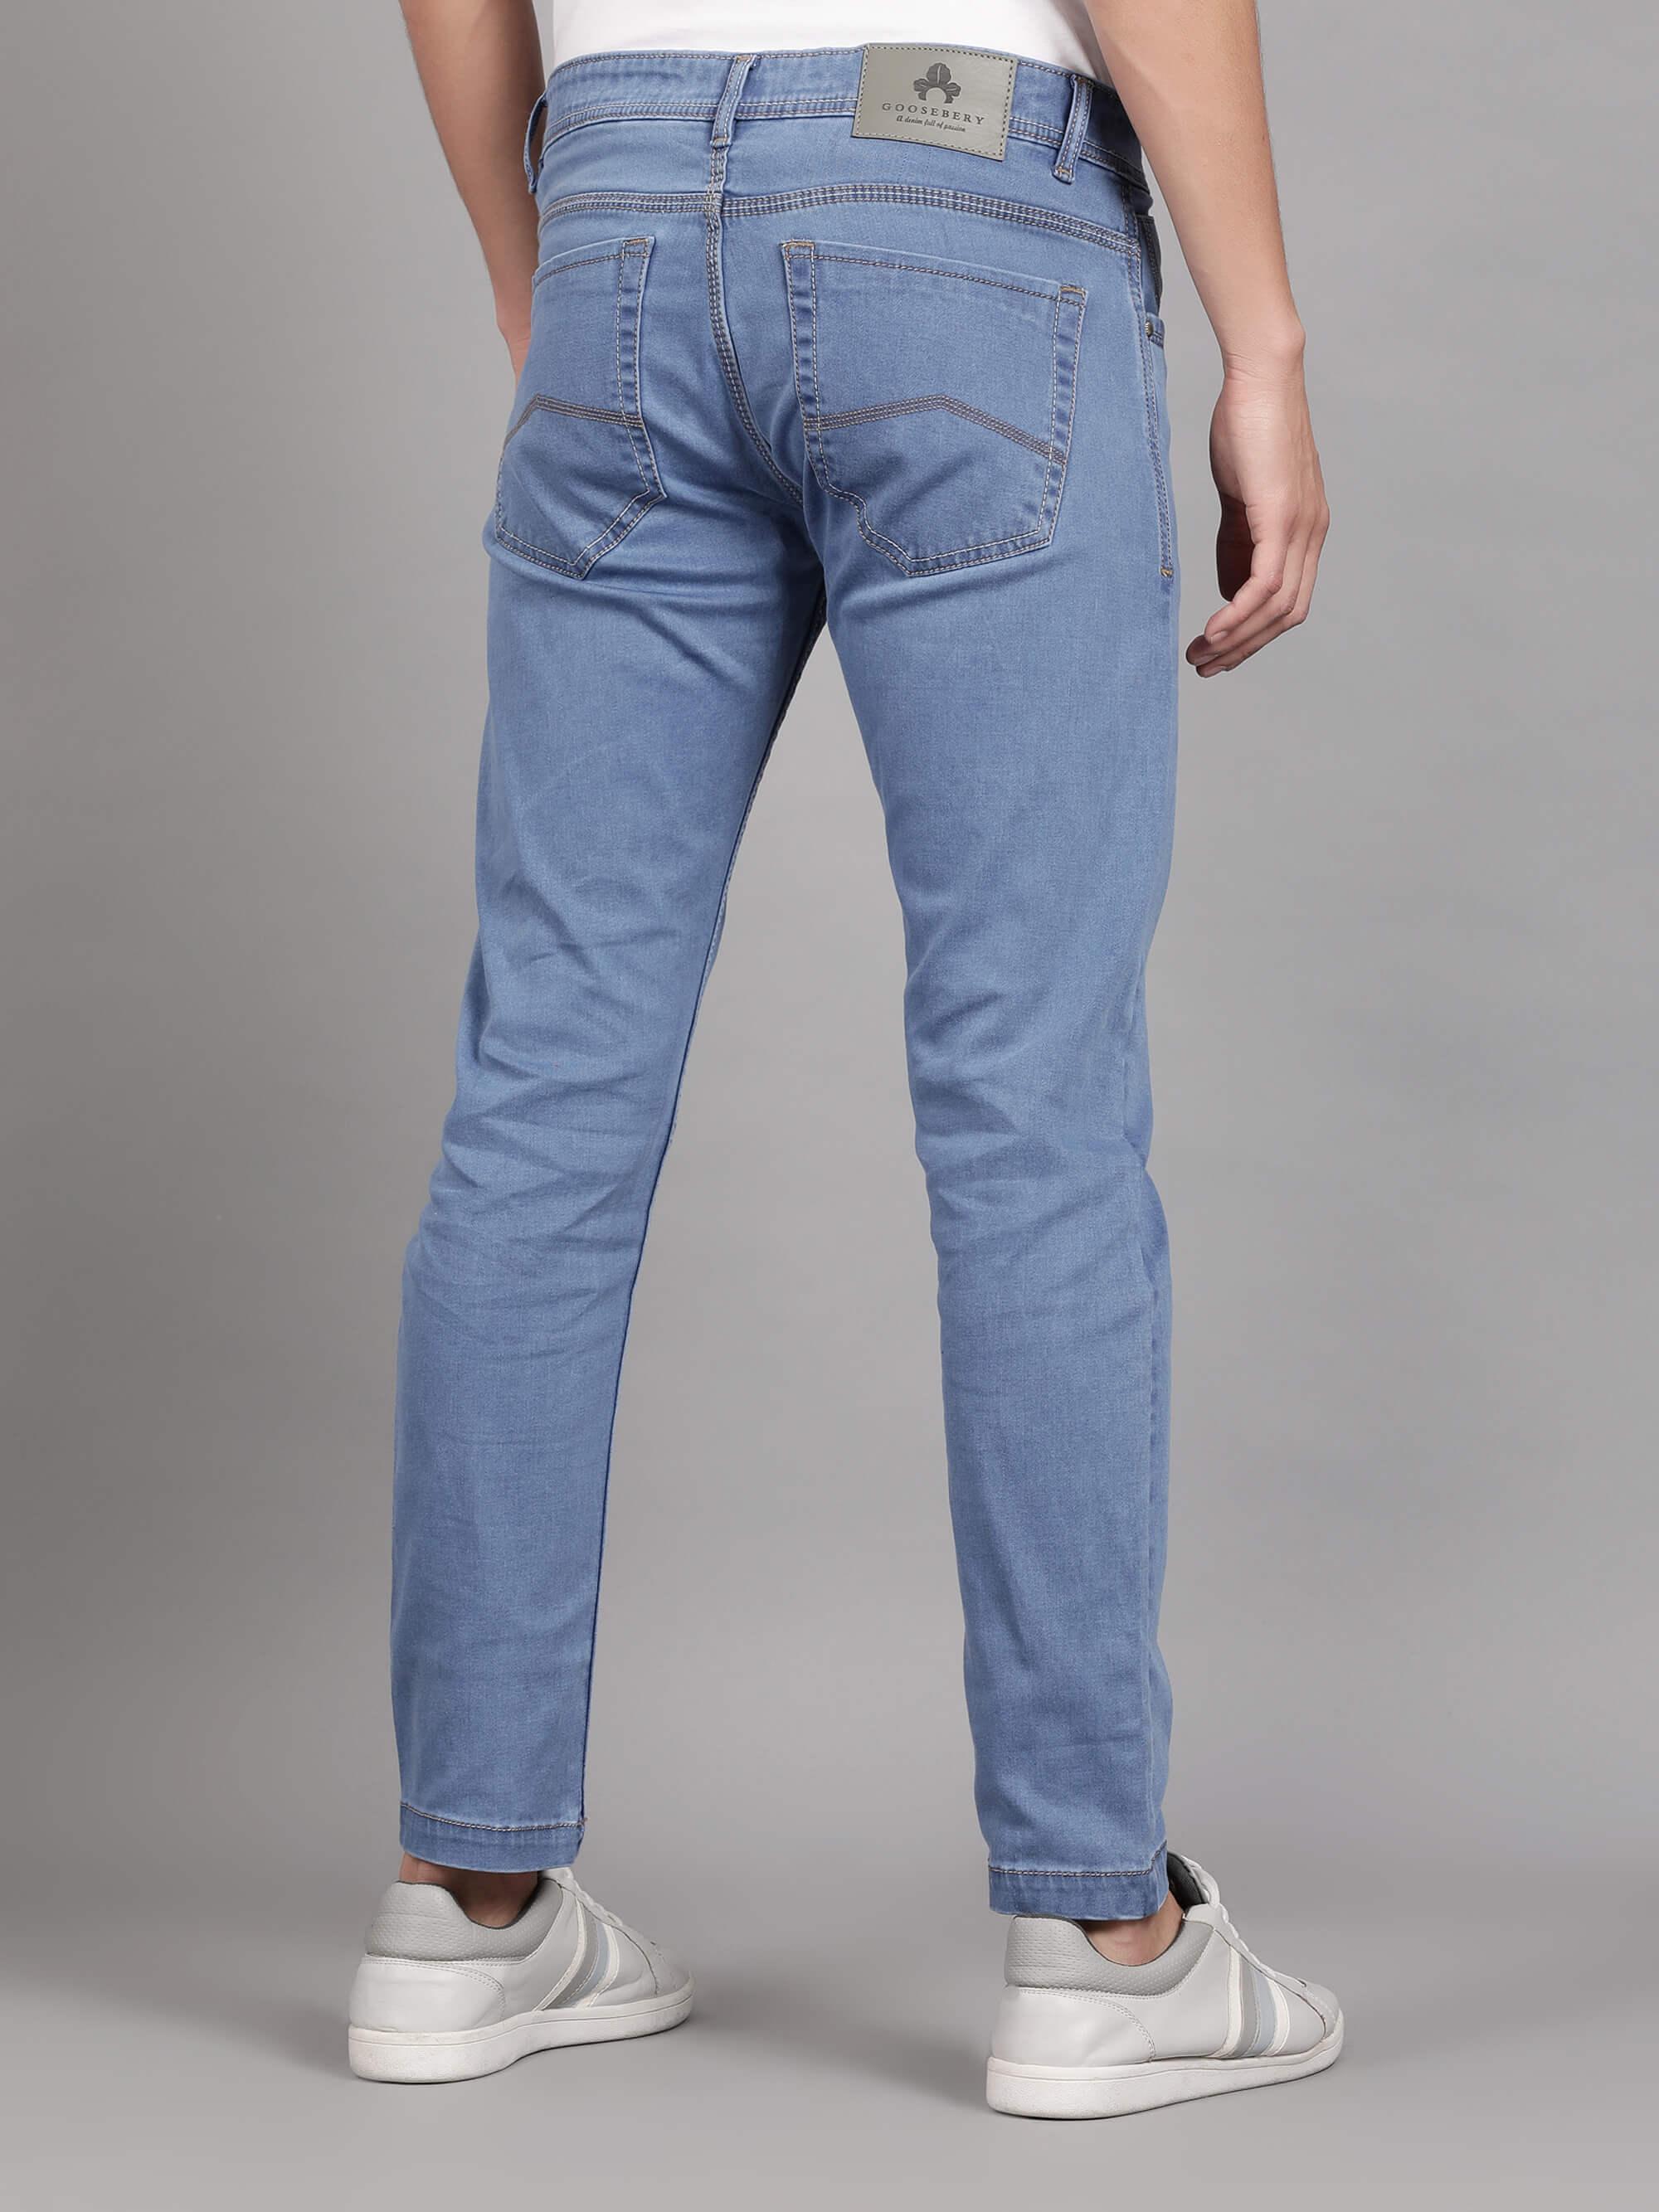 Only & Sons skinny fit jeans in light blue | ASOS